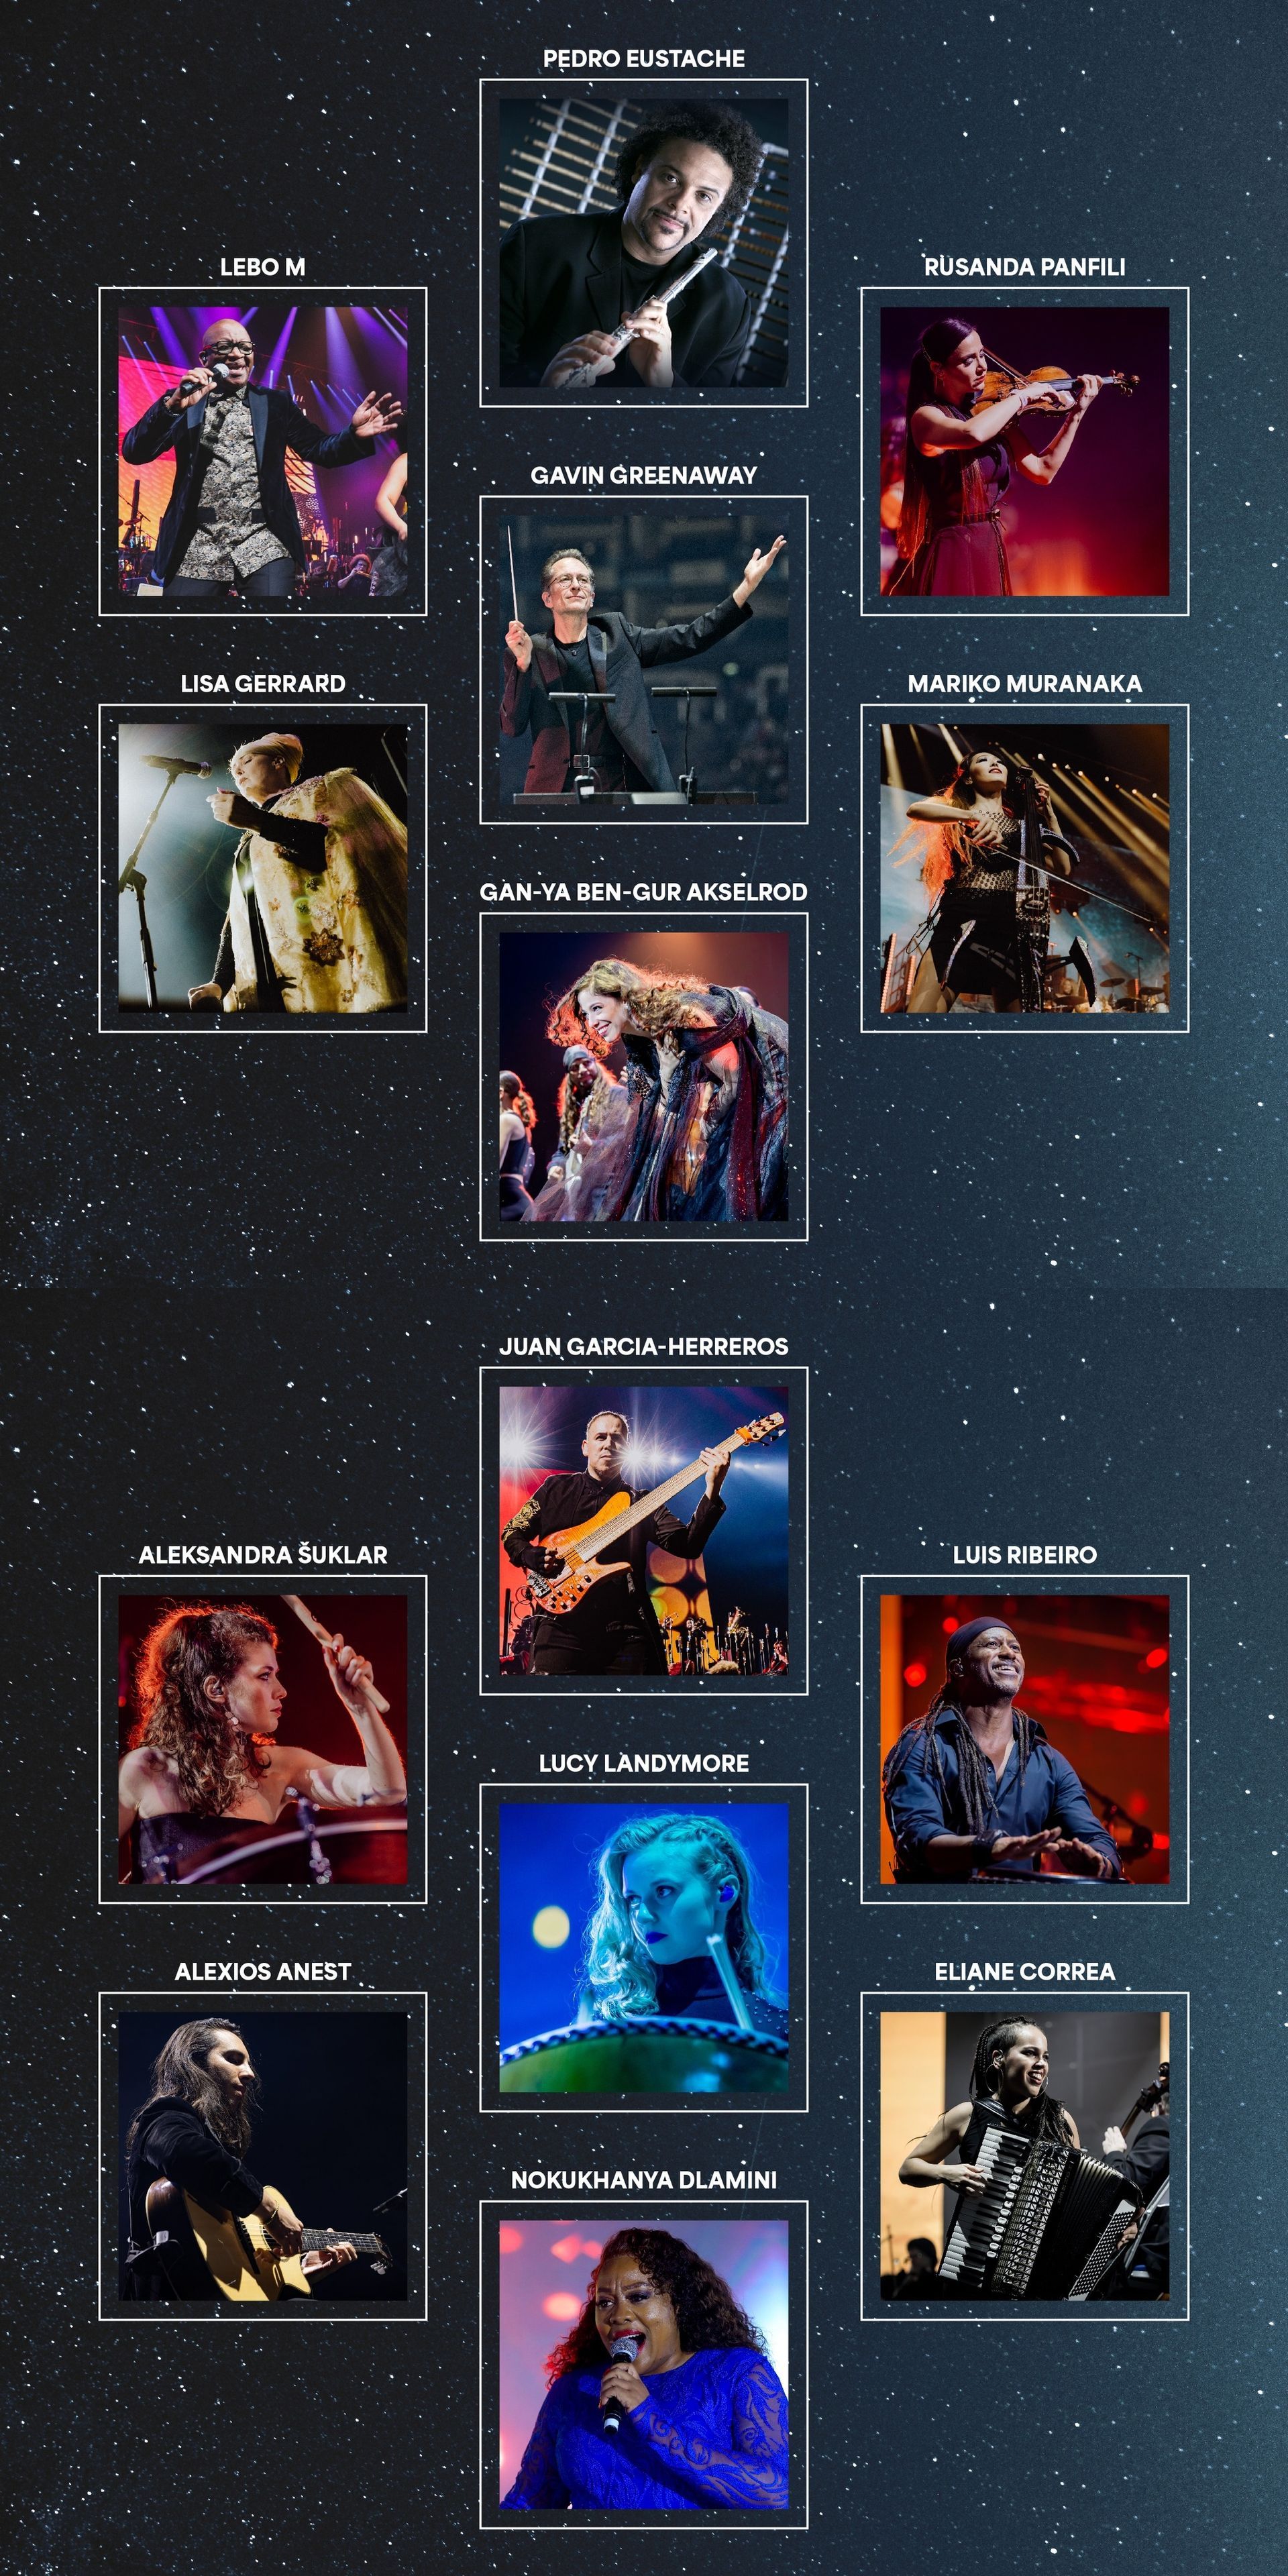 The World of Hans Zimmer - A New Dimension comes to 3Arena Dublin on Friday 12th April 2024. Tickets on sale now from www.ticketmaster.ie
Soloists for the forthcoming tour have been announced.  Please find a short biography of each soloist below.
